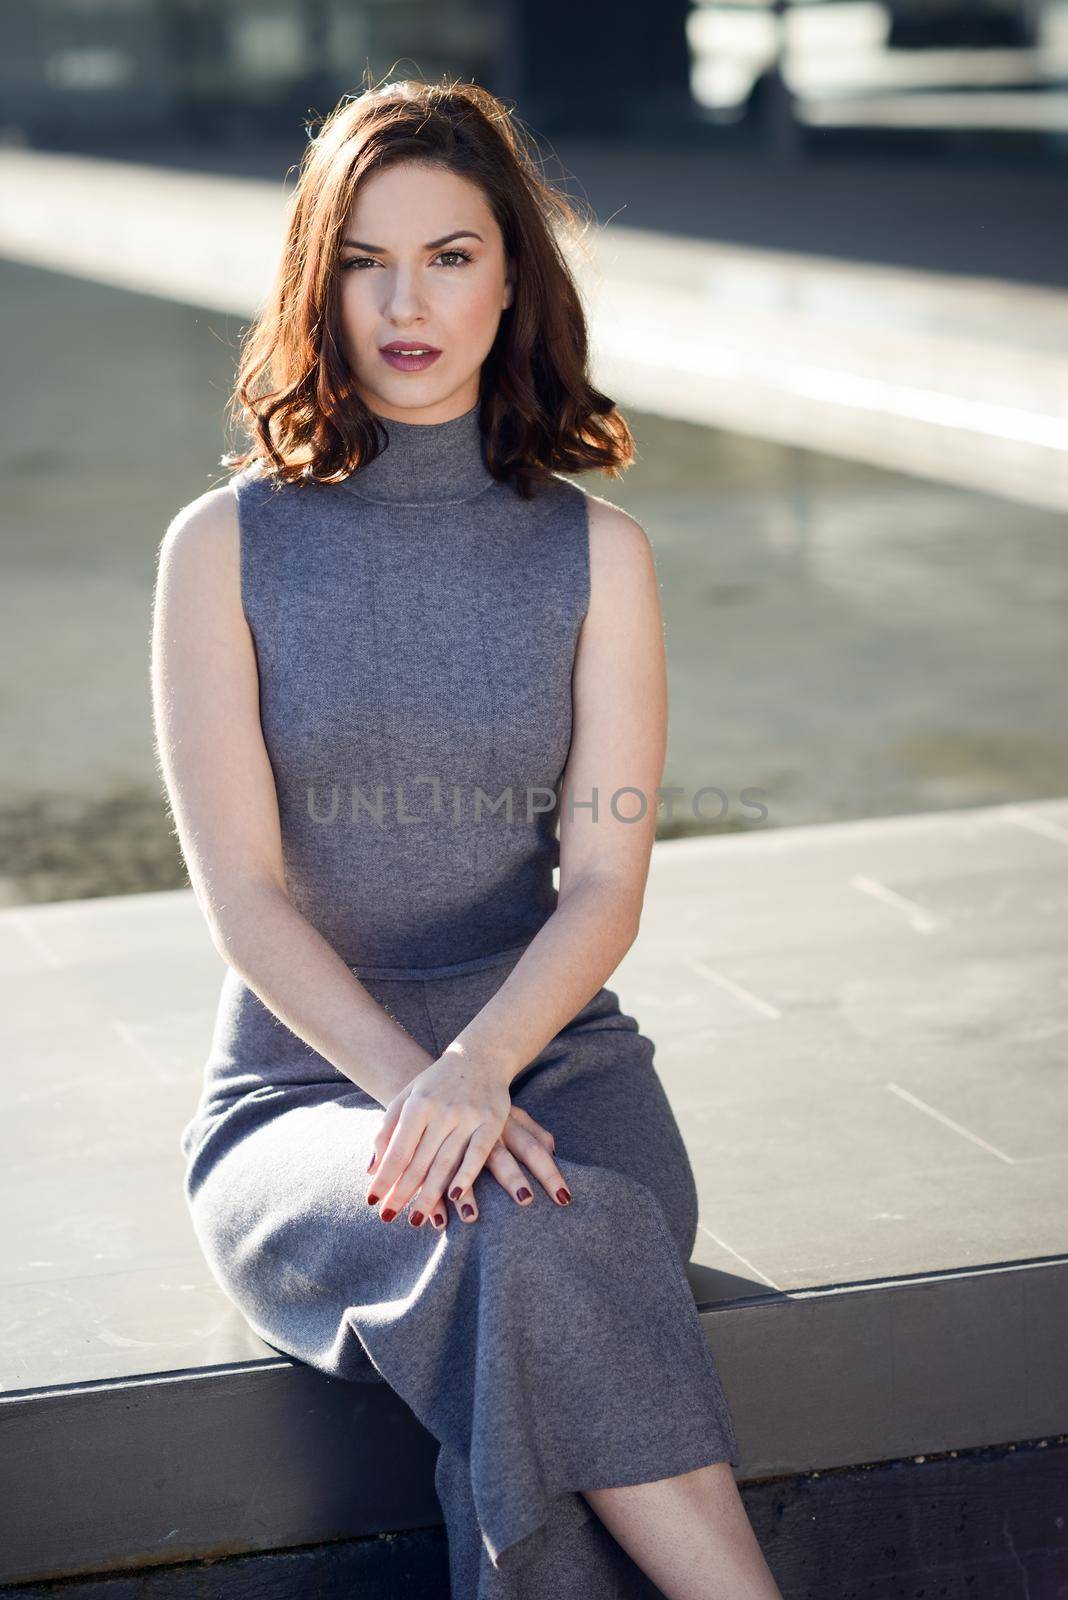 Beautiful young woman, model of fashion, sitting in urban background